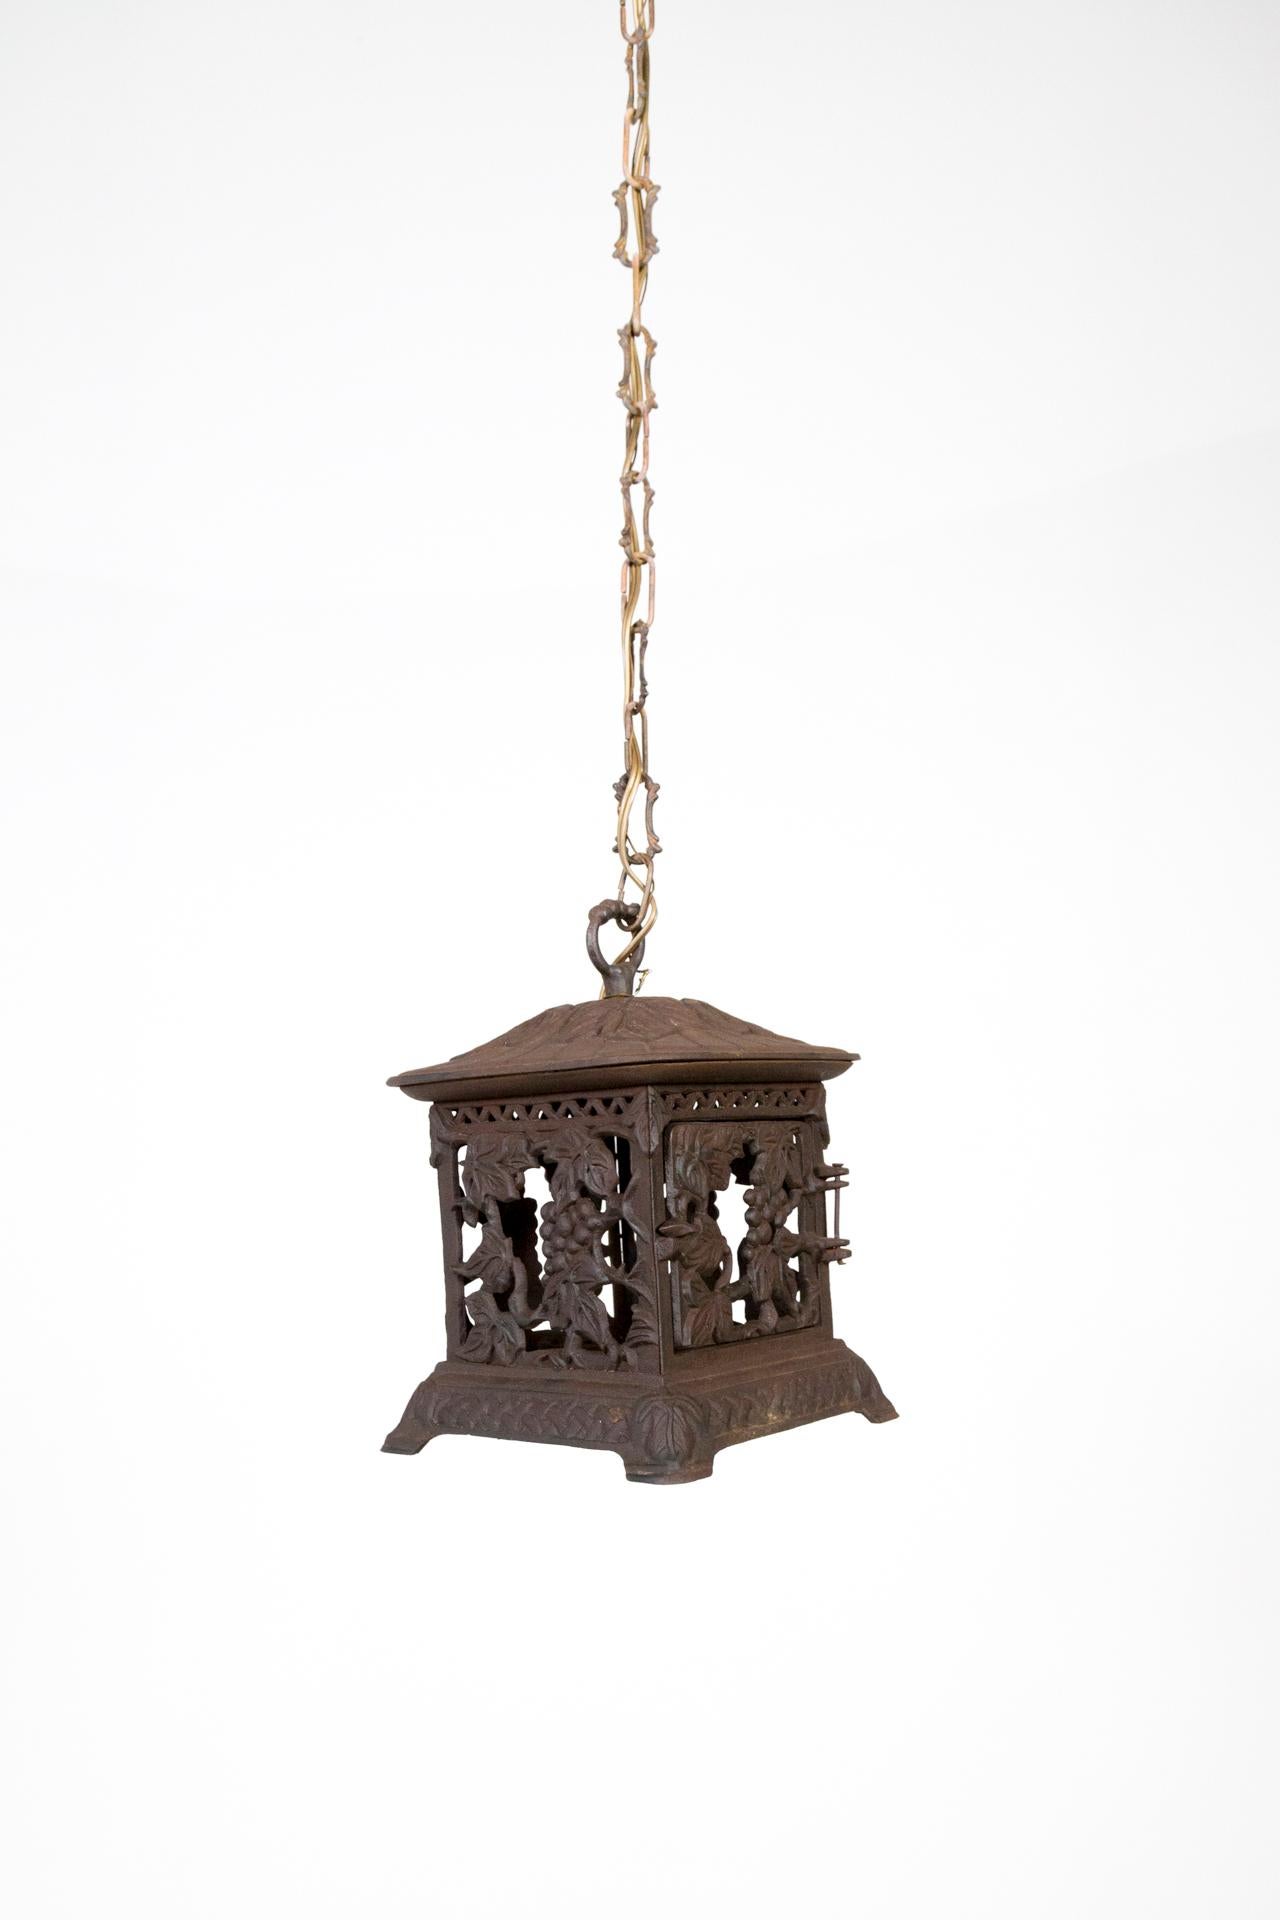 A pair of diminutive, vineyard themed, iron lanterns in a square shape with a base and a door. Newly wired into lanterns with decorative chains. One medium socket. Measures: 10” height x 7 x 7.